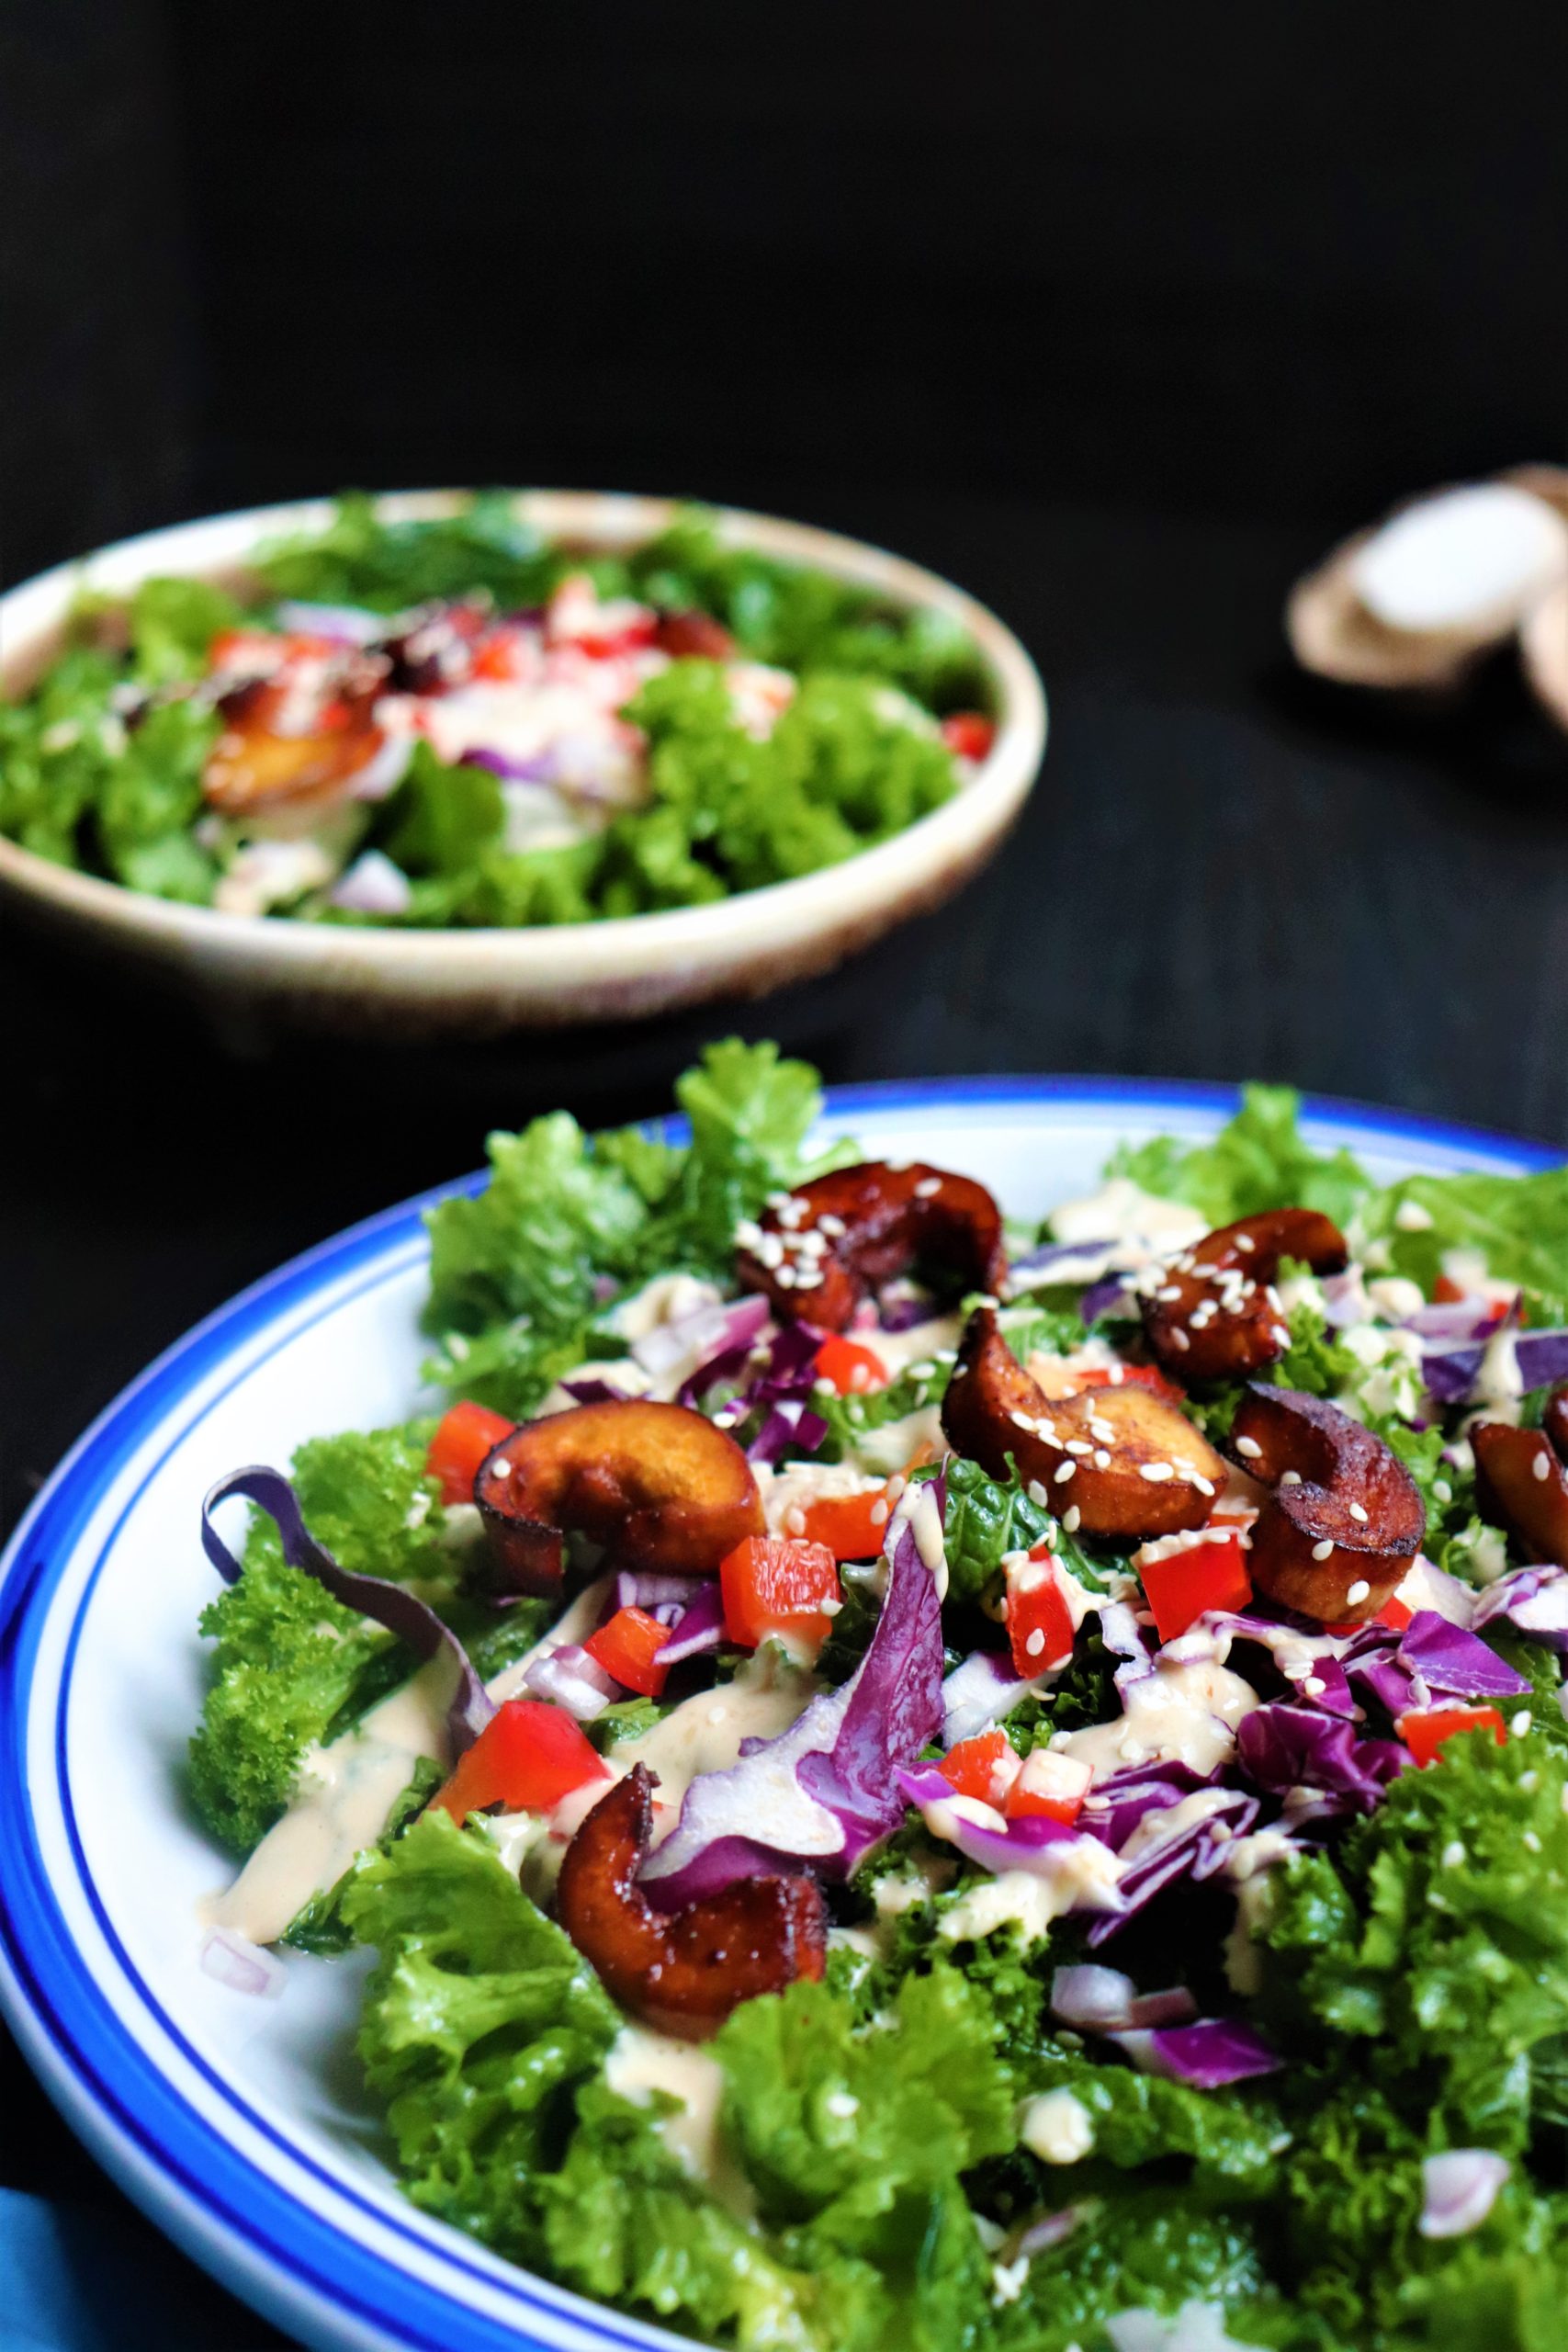 White blue plate with lots of green leaves, chopped veggies in different colors like red, purple, and brown drizzle with a light brown dressing